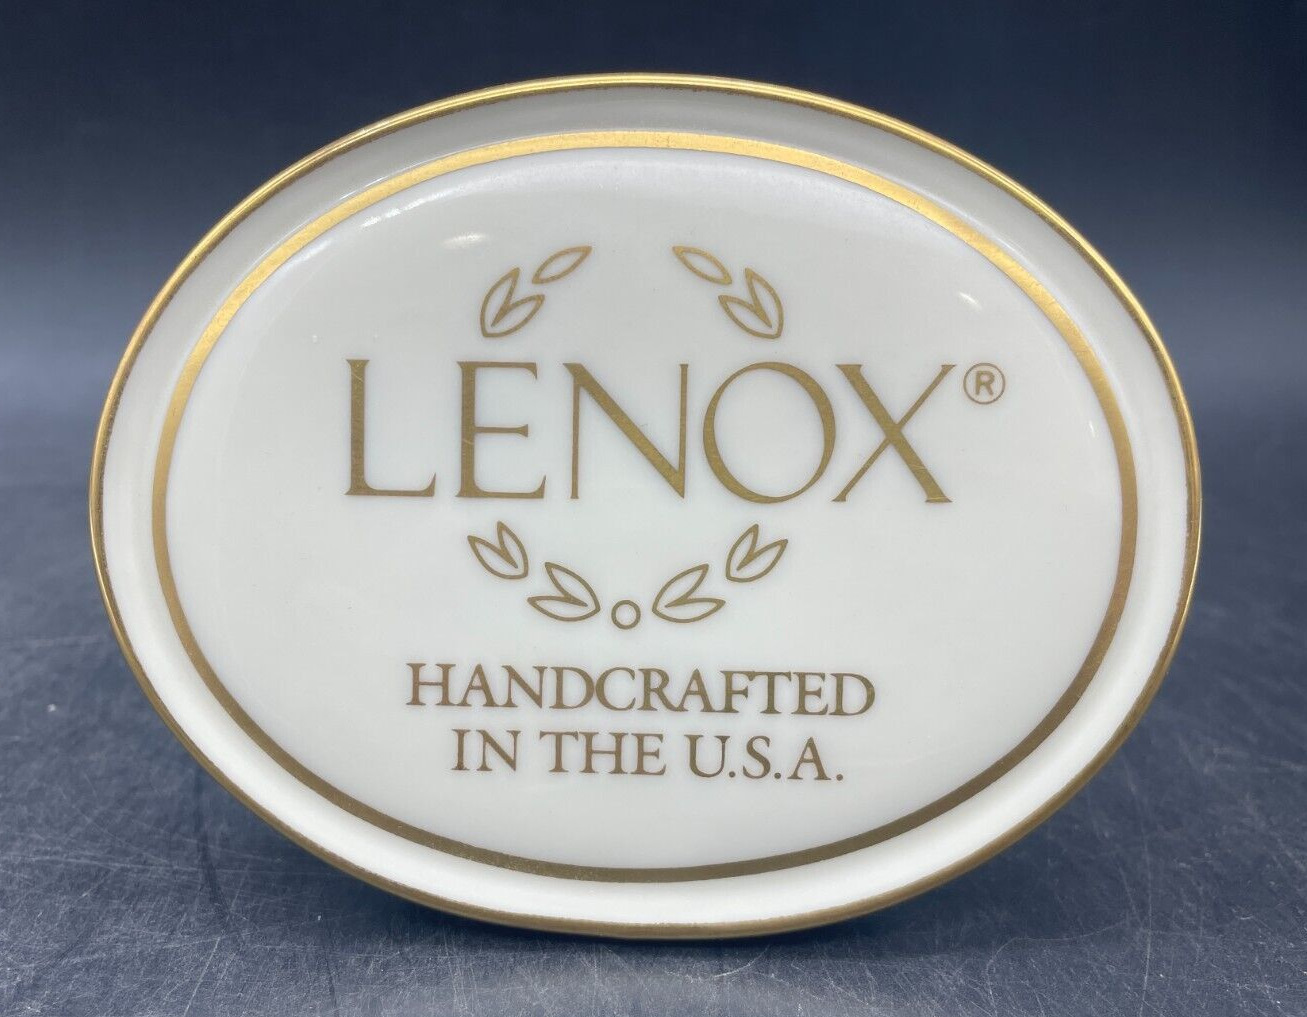 LENOX CHINA HANDCRAFTED IN U.S.A. DEALER SIGN / PLAQUE Advertising Display